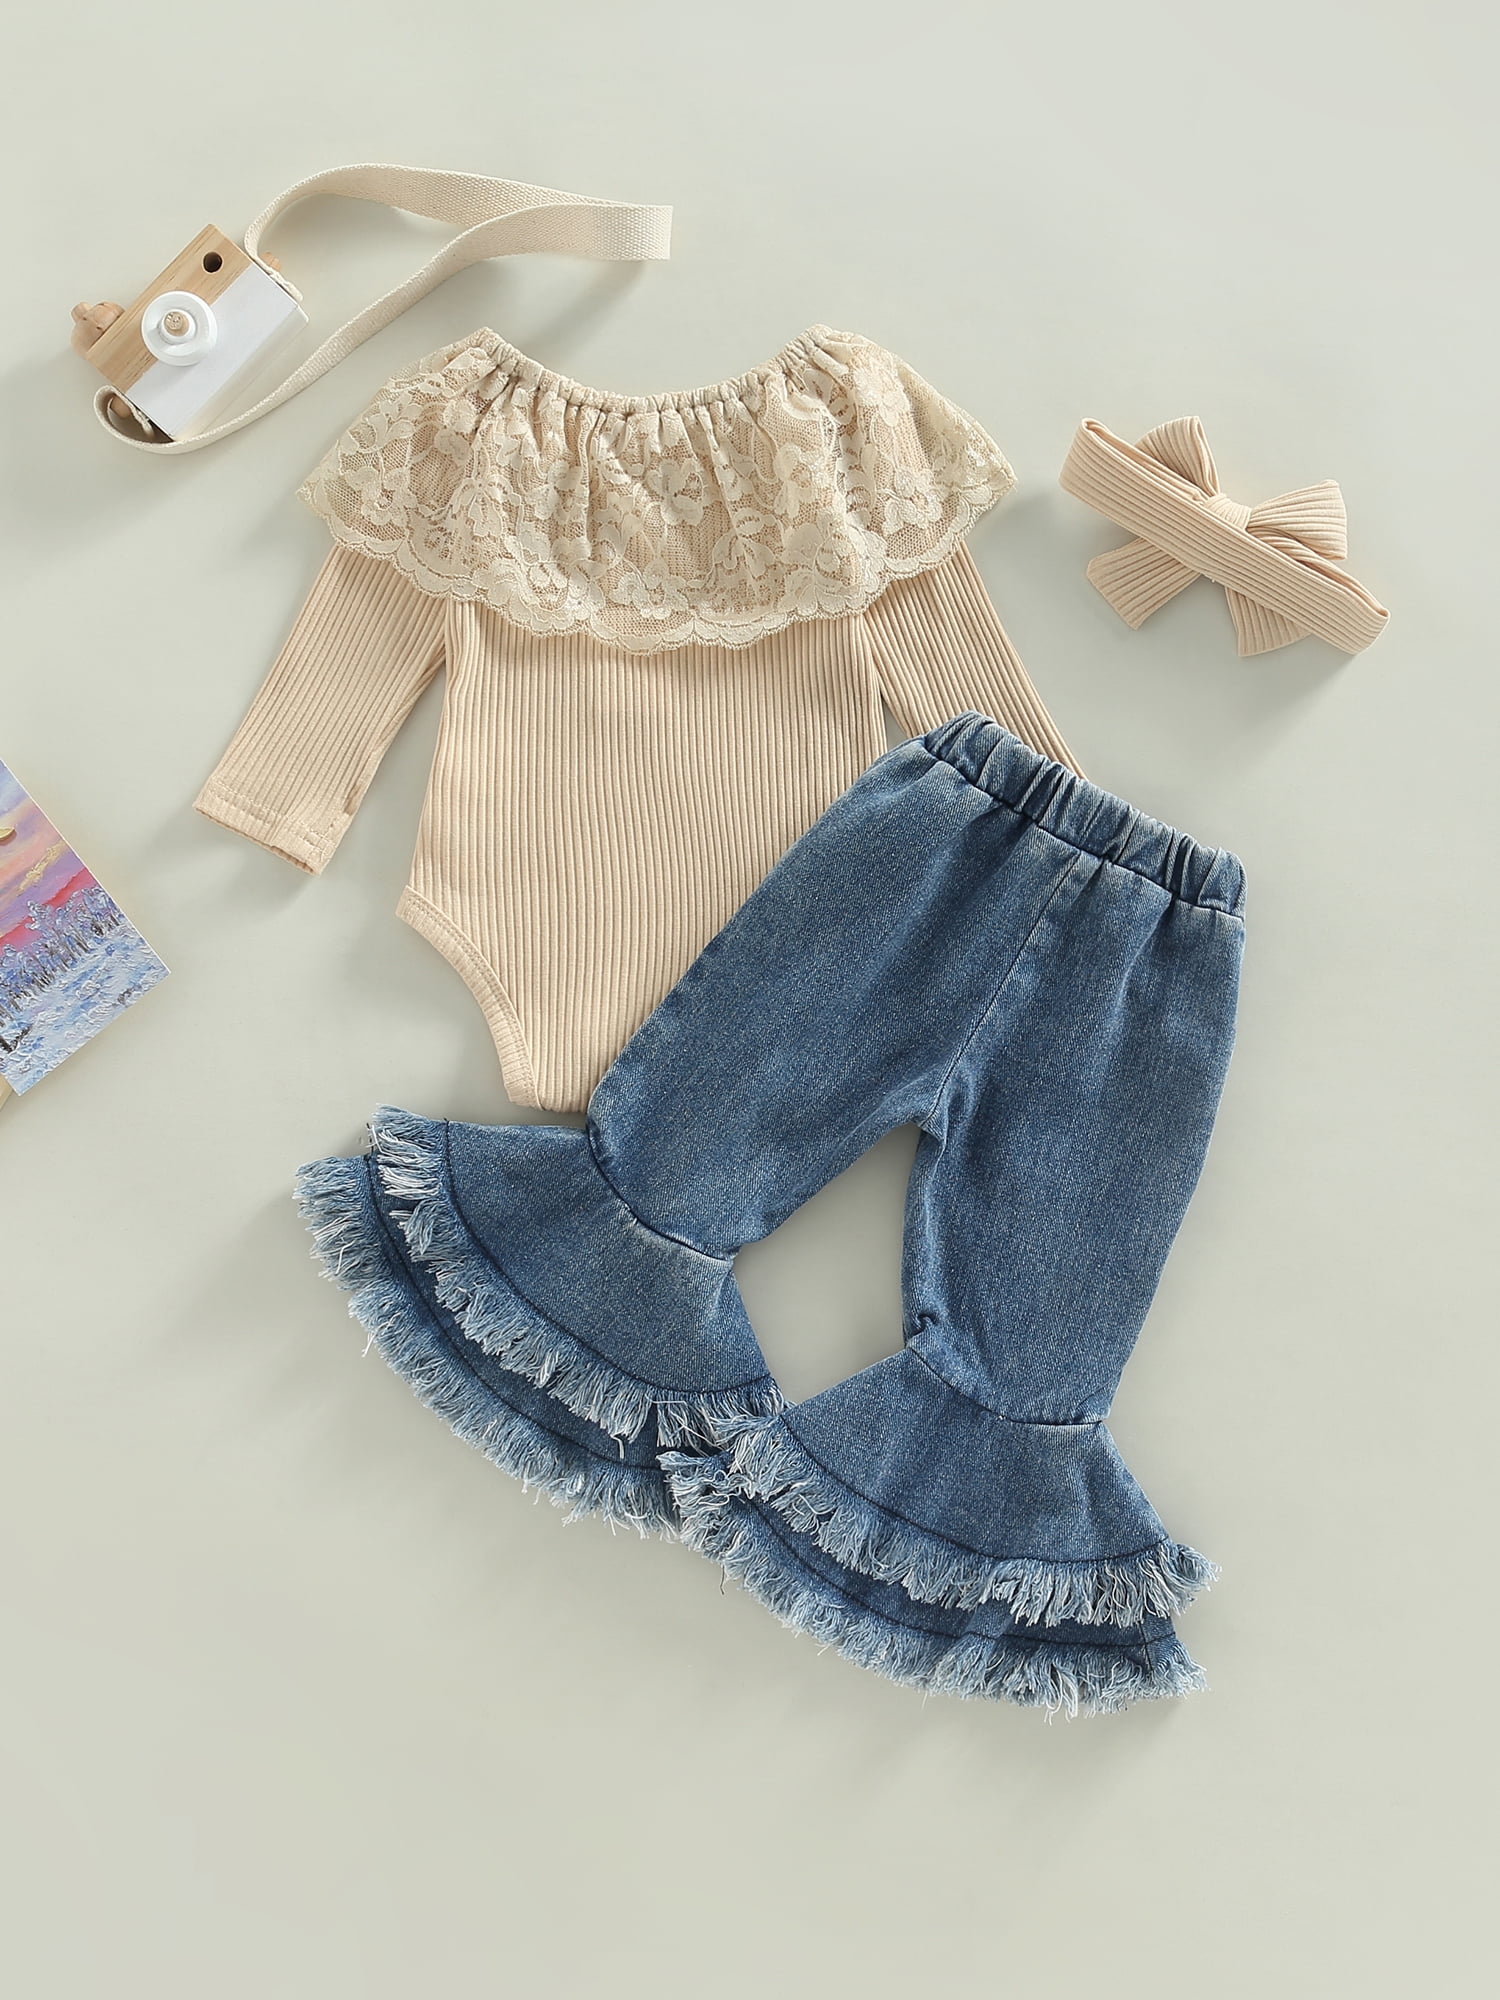 Ribbed 3pcs Letter Embroidery and Floral Print Short-sleeve Baby Set